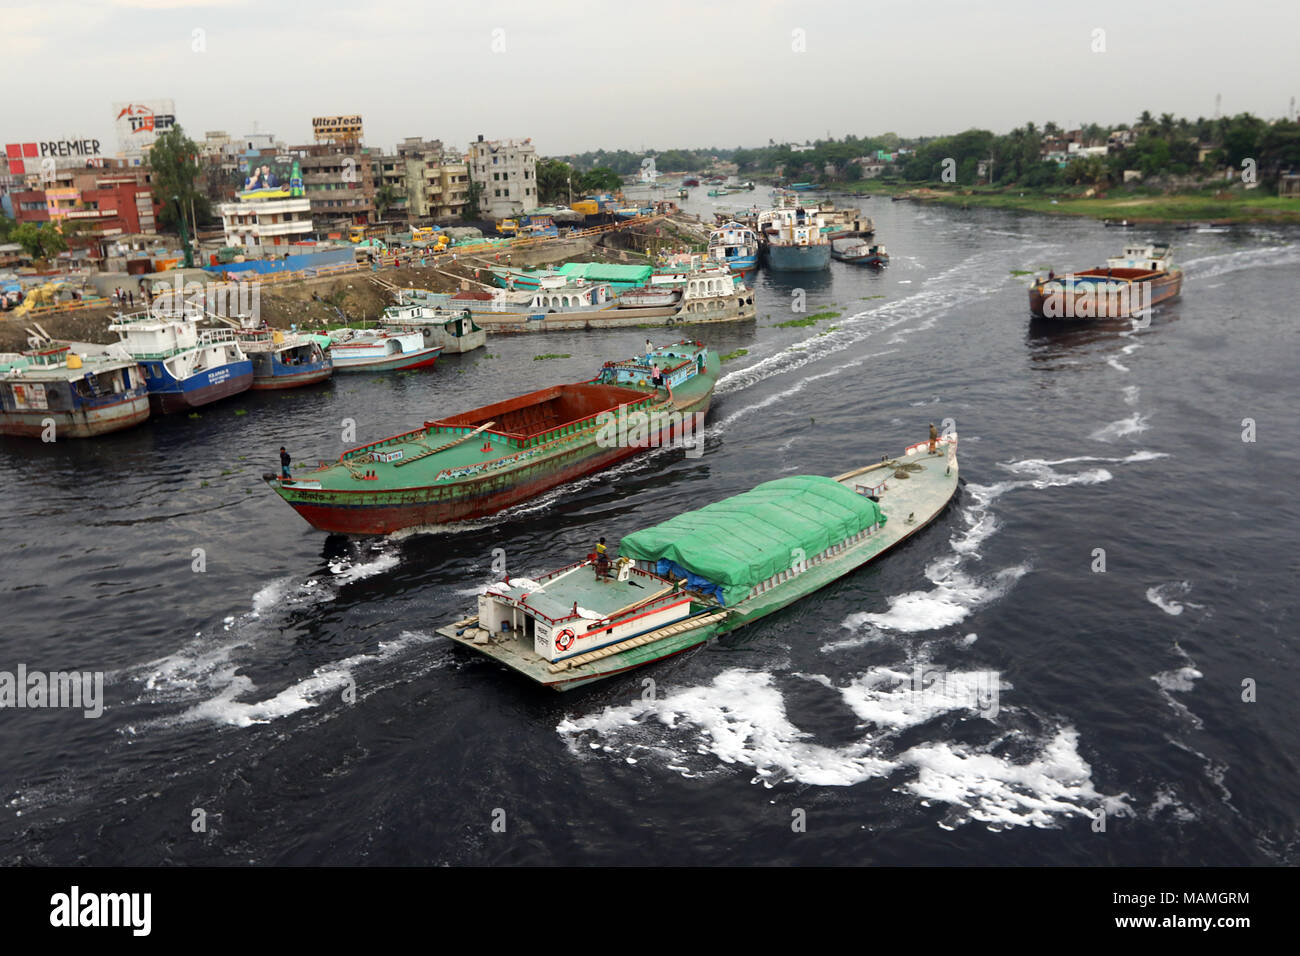 DHAKA-2018. Boats on the polluted turag River in Dhaka. Stock Photo